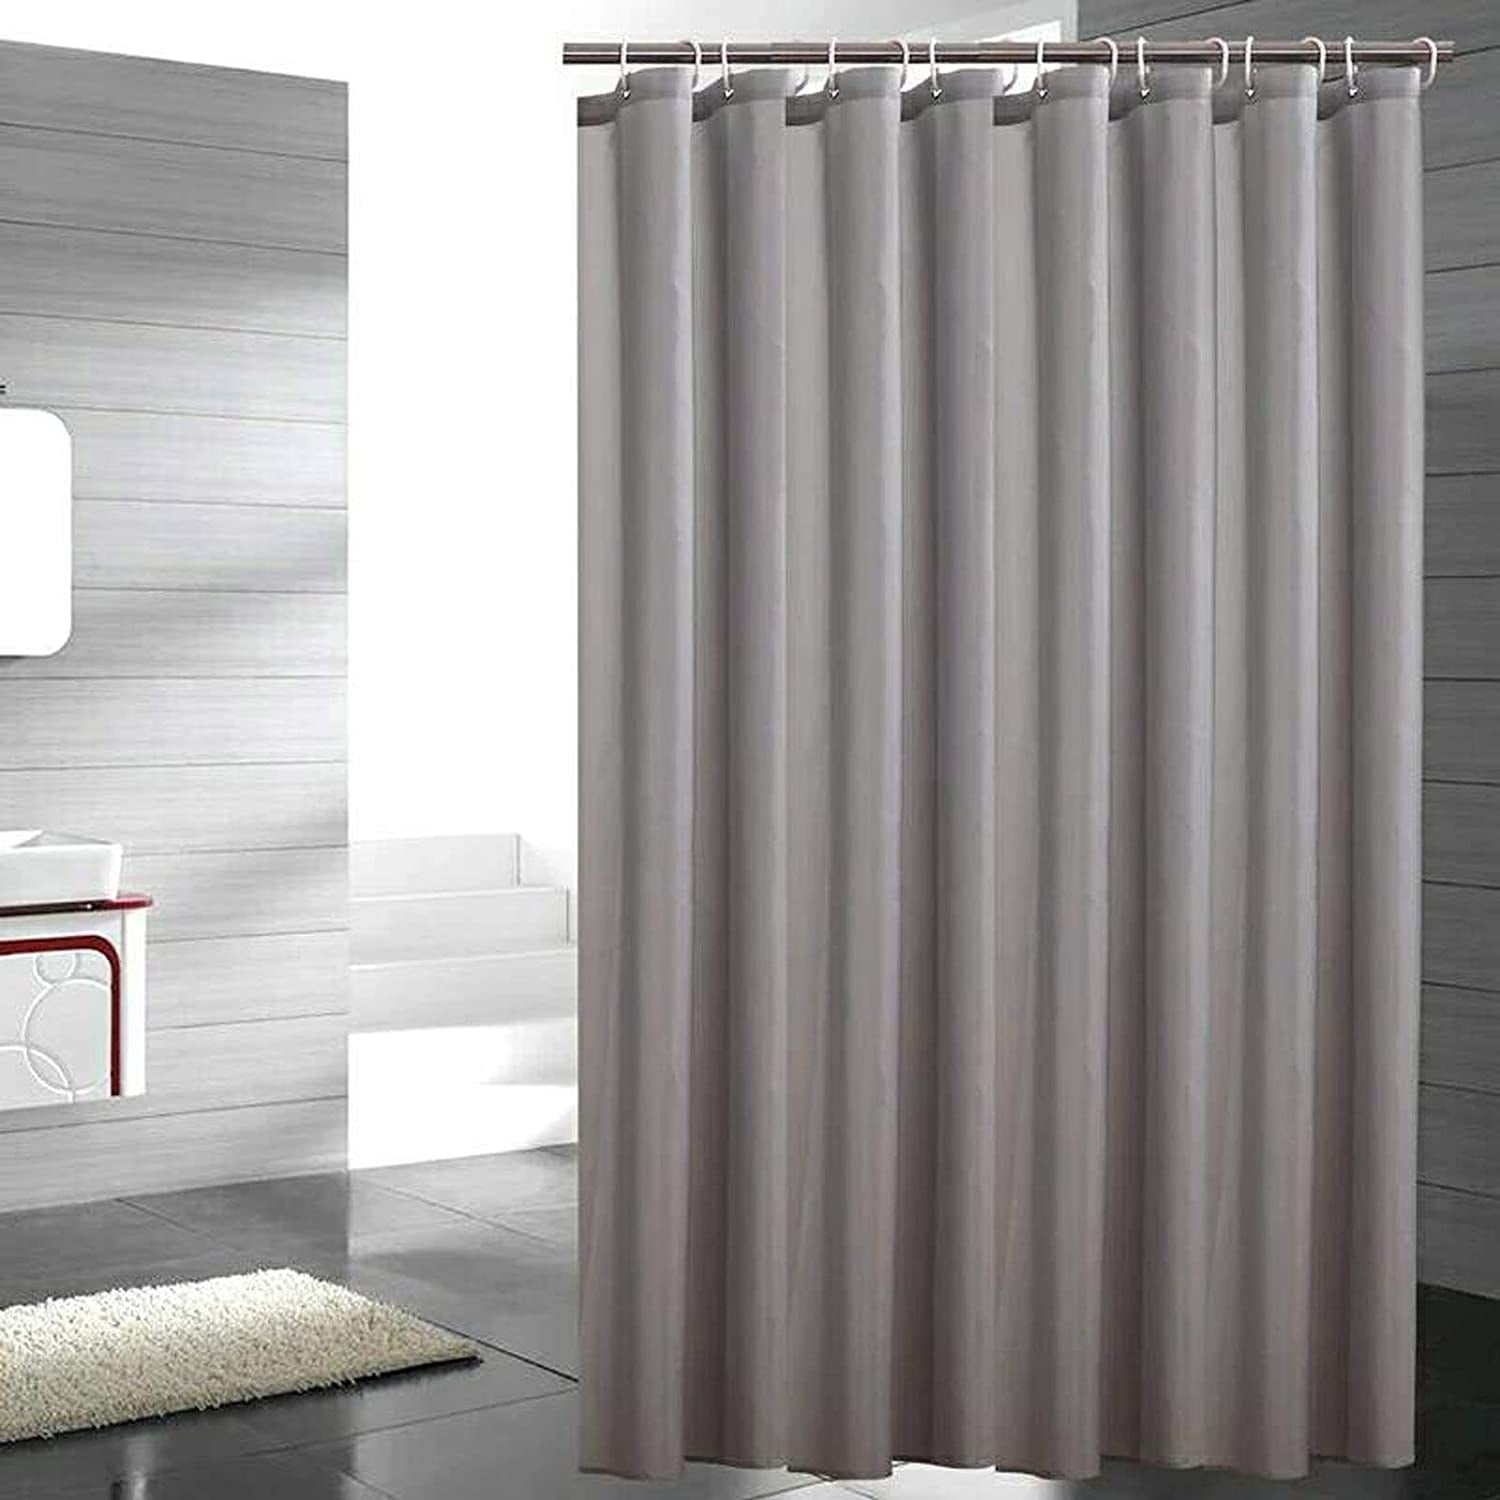 A Gray Sand Waterproof Bathroom Polyester Shower Curtain Liner Water Resistant 